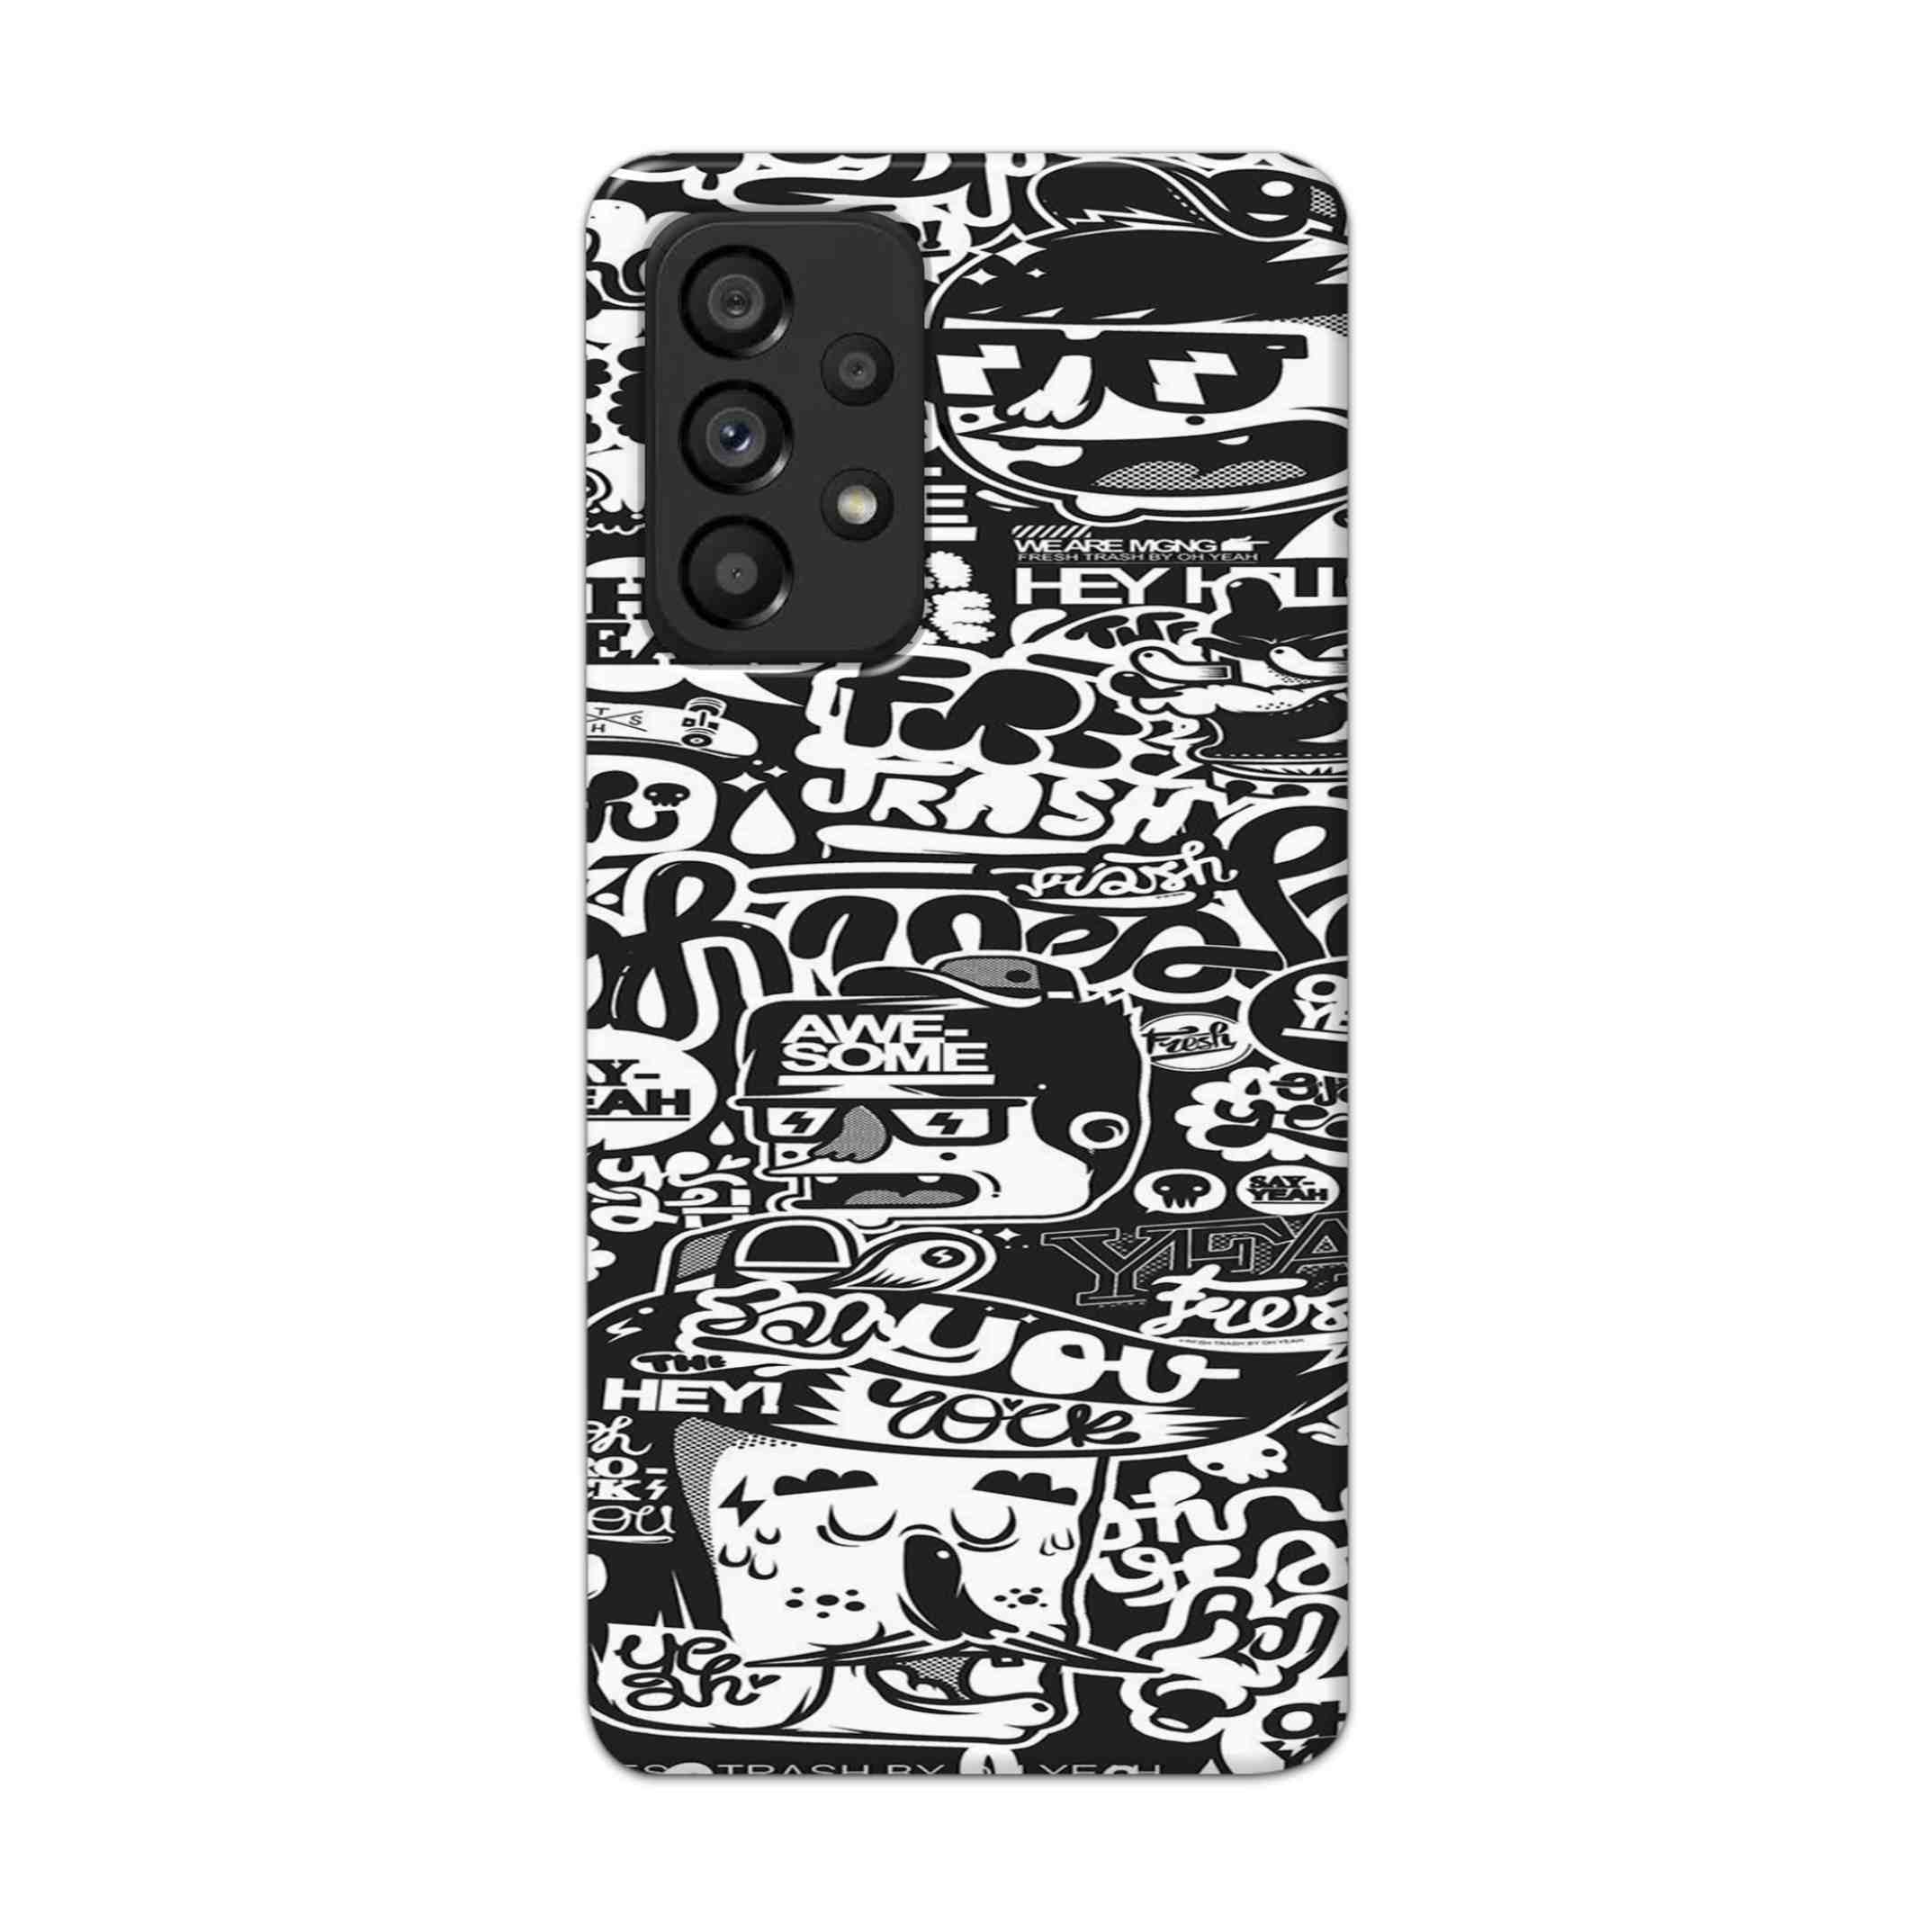 Buy Awesome Hard Back Mobile Phone Case Cover For Samsung Galaxy A53 5G Online